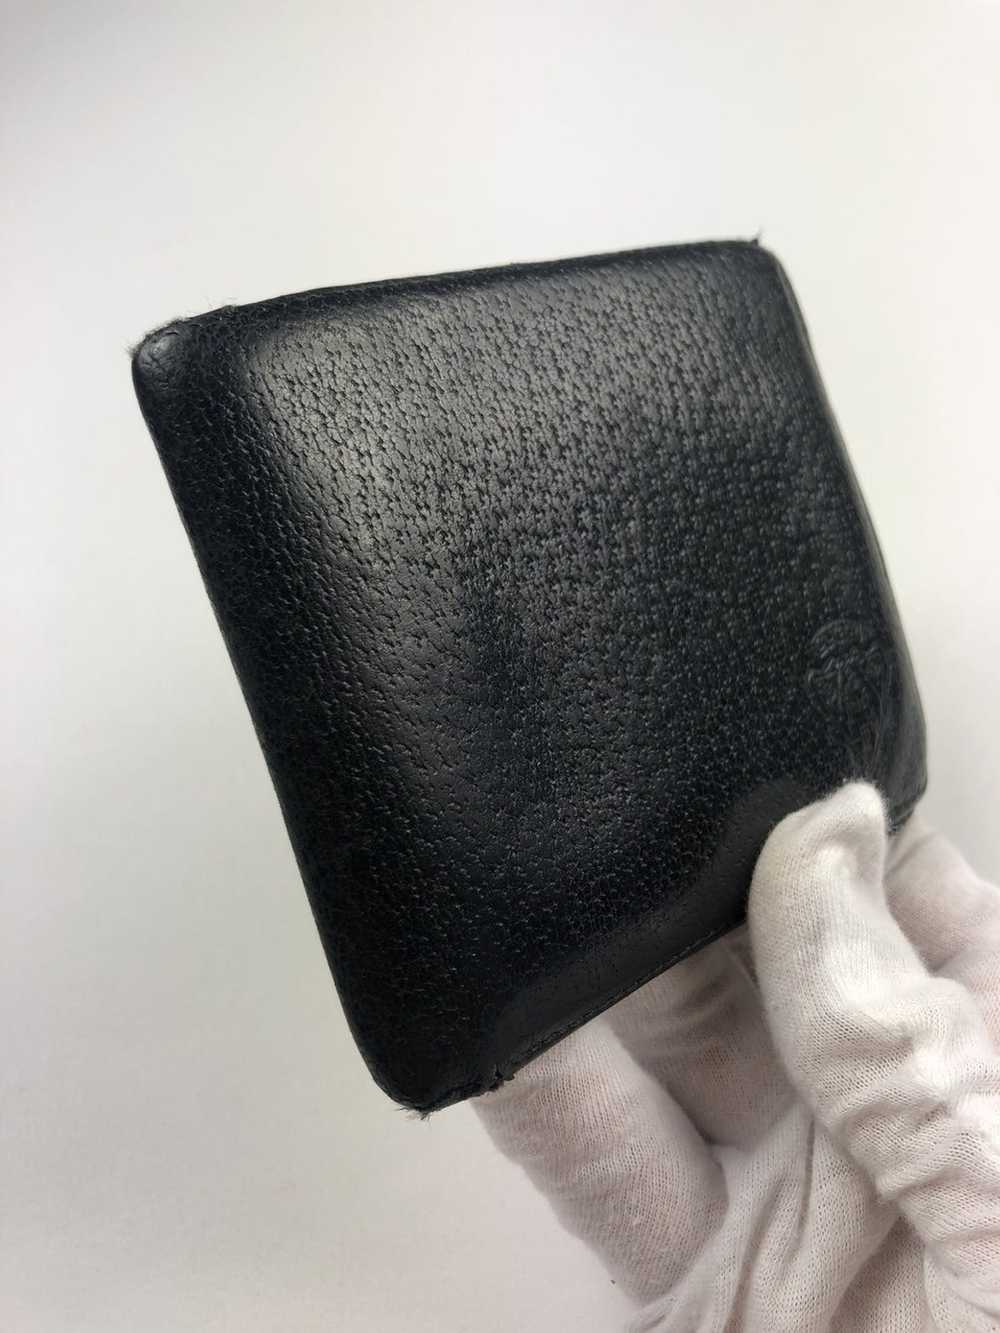 Gucci Gucci crest leather bifold wallet - image 9